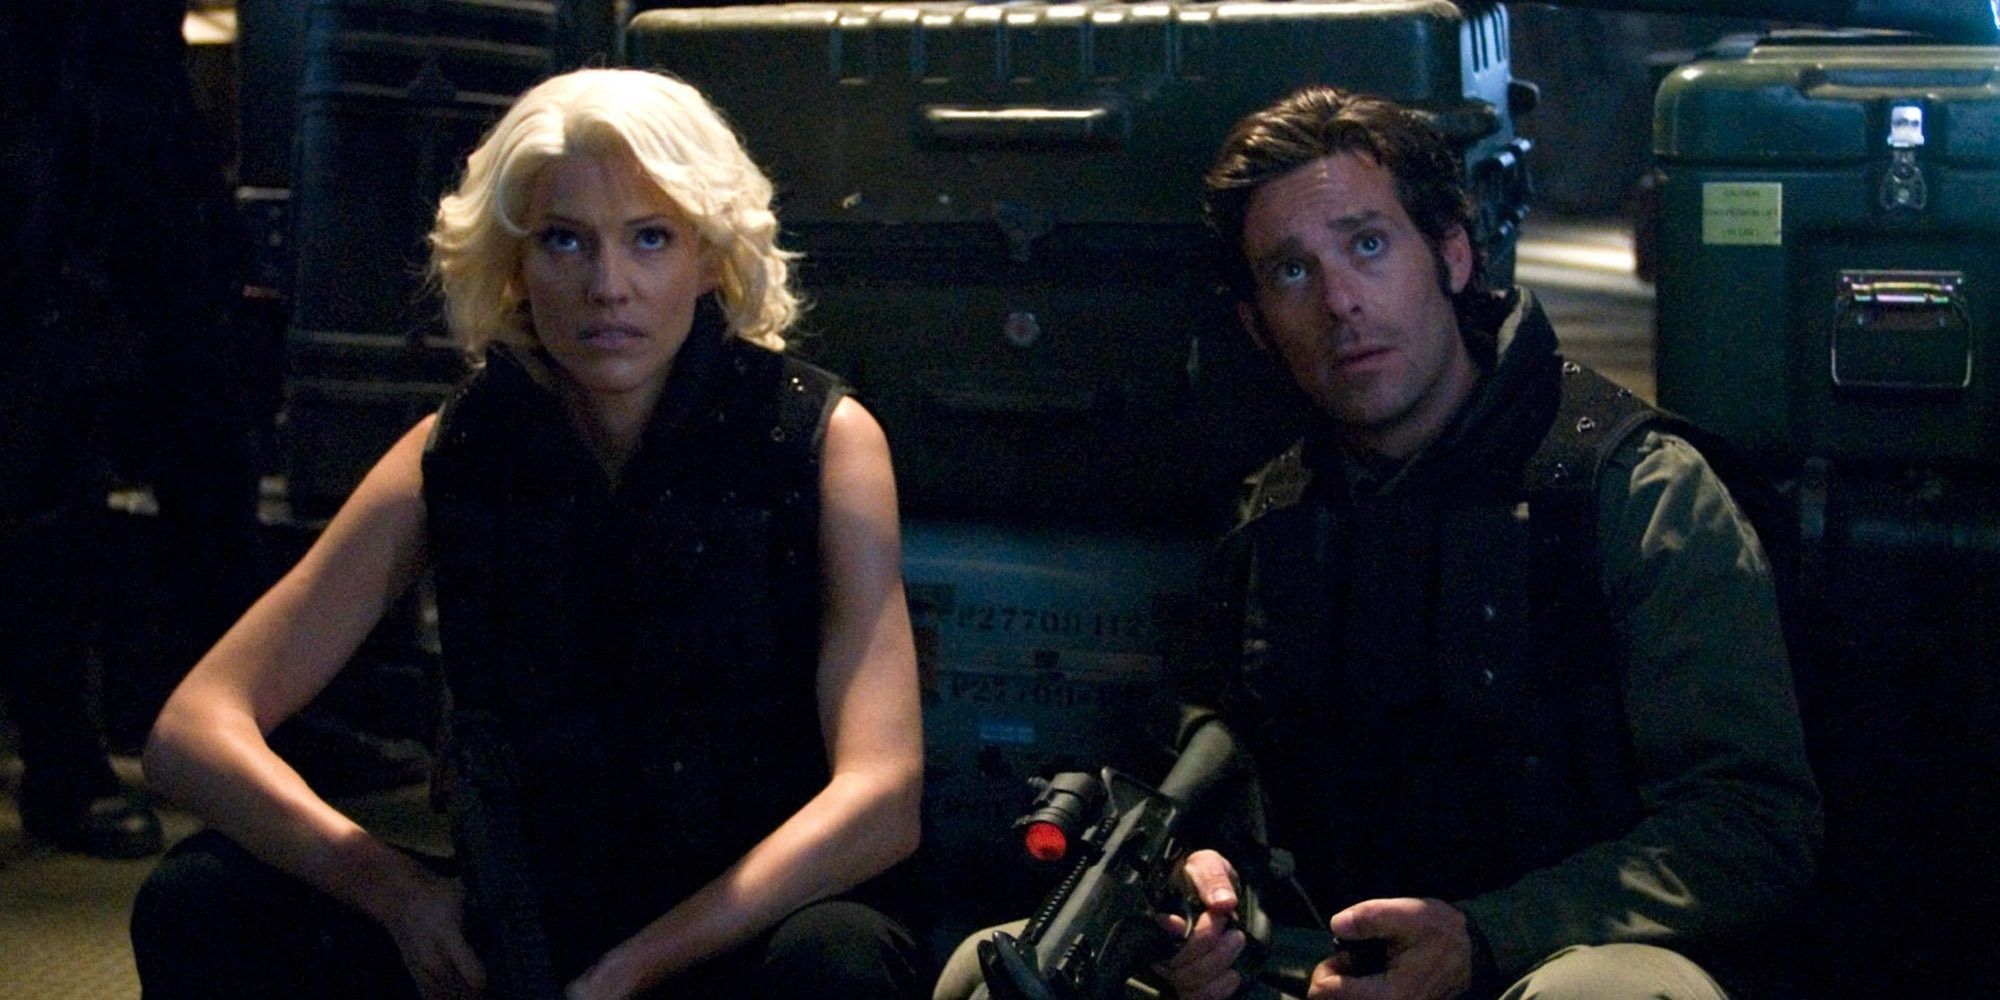 Two characters in Battlestar Galactica look up at something off camera.